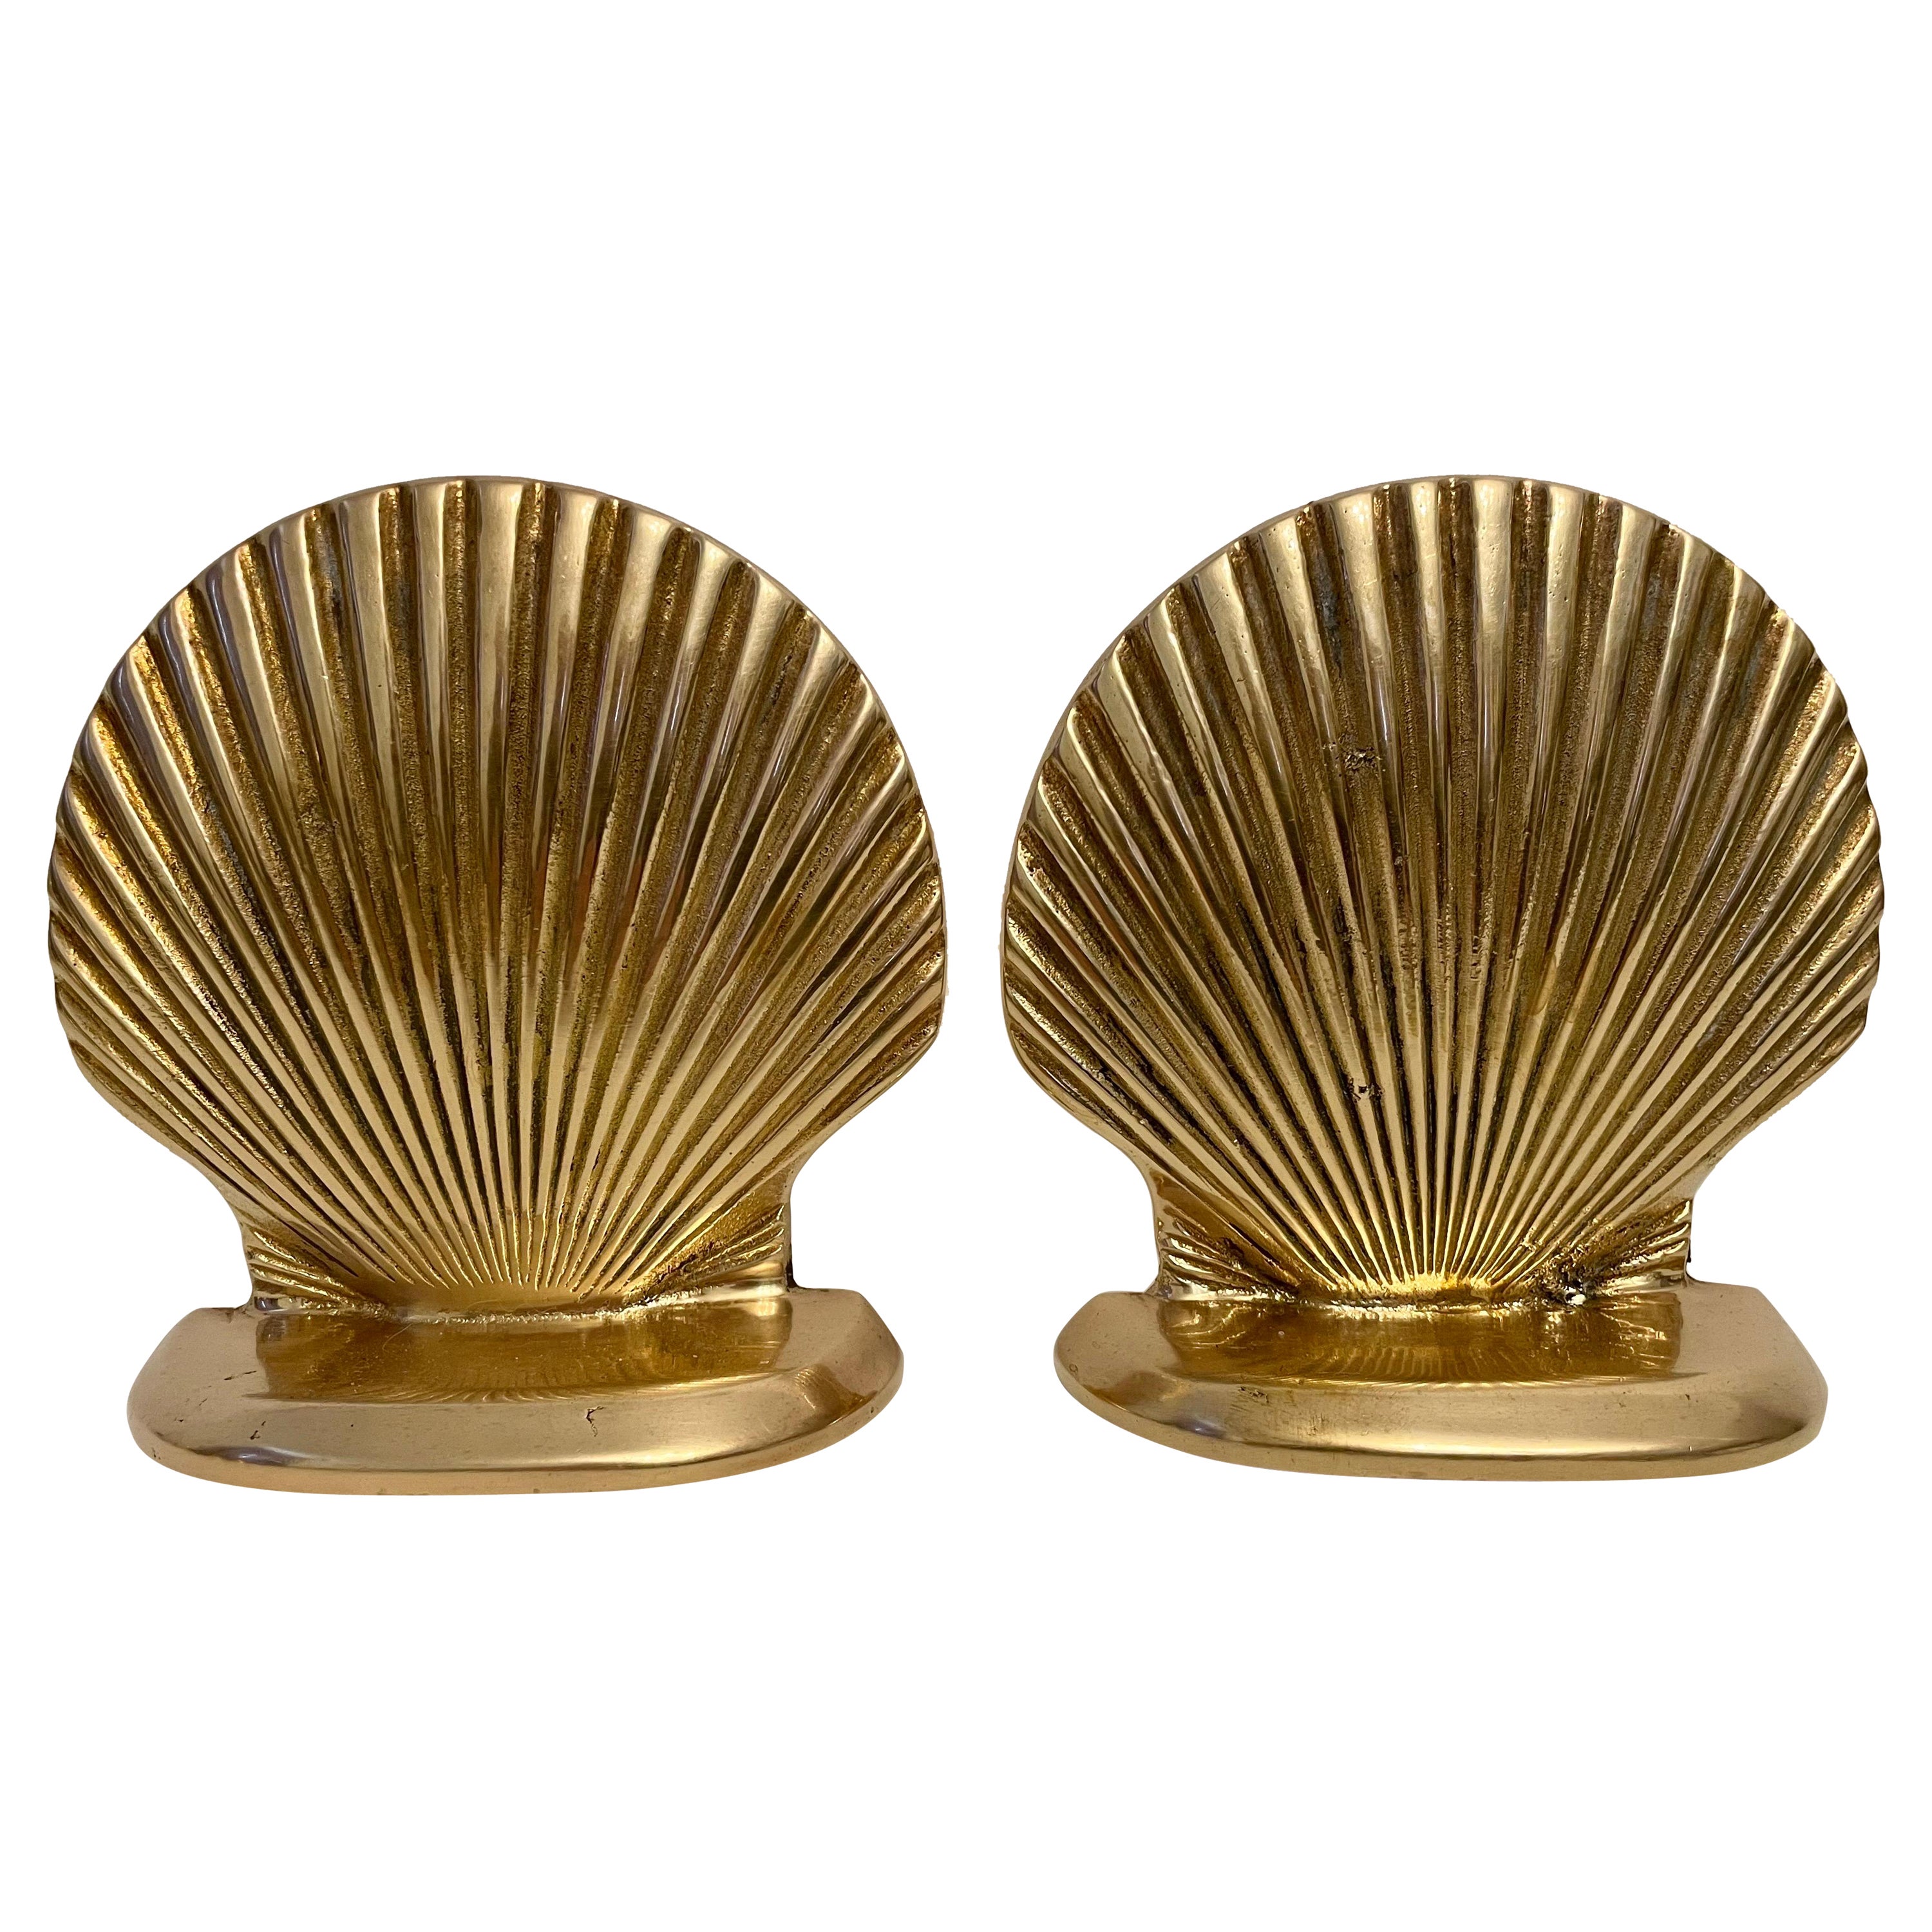 Vintage Brass Clam Shell Seashell Bookends For Sale at 1stDibs